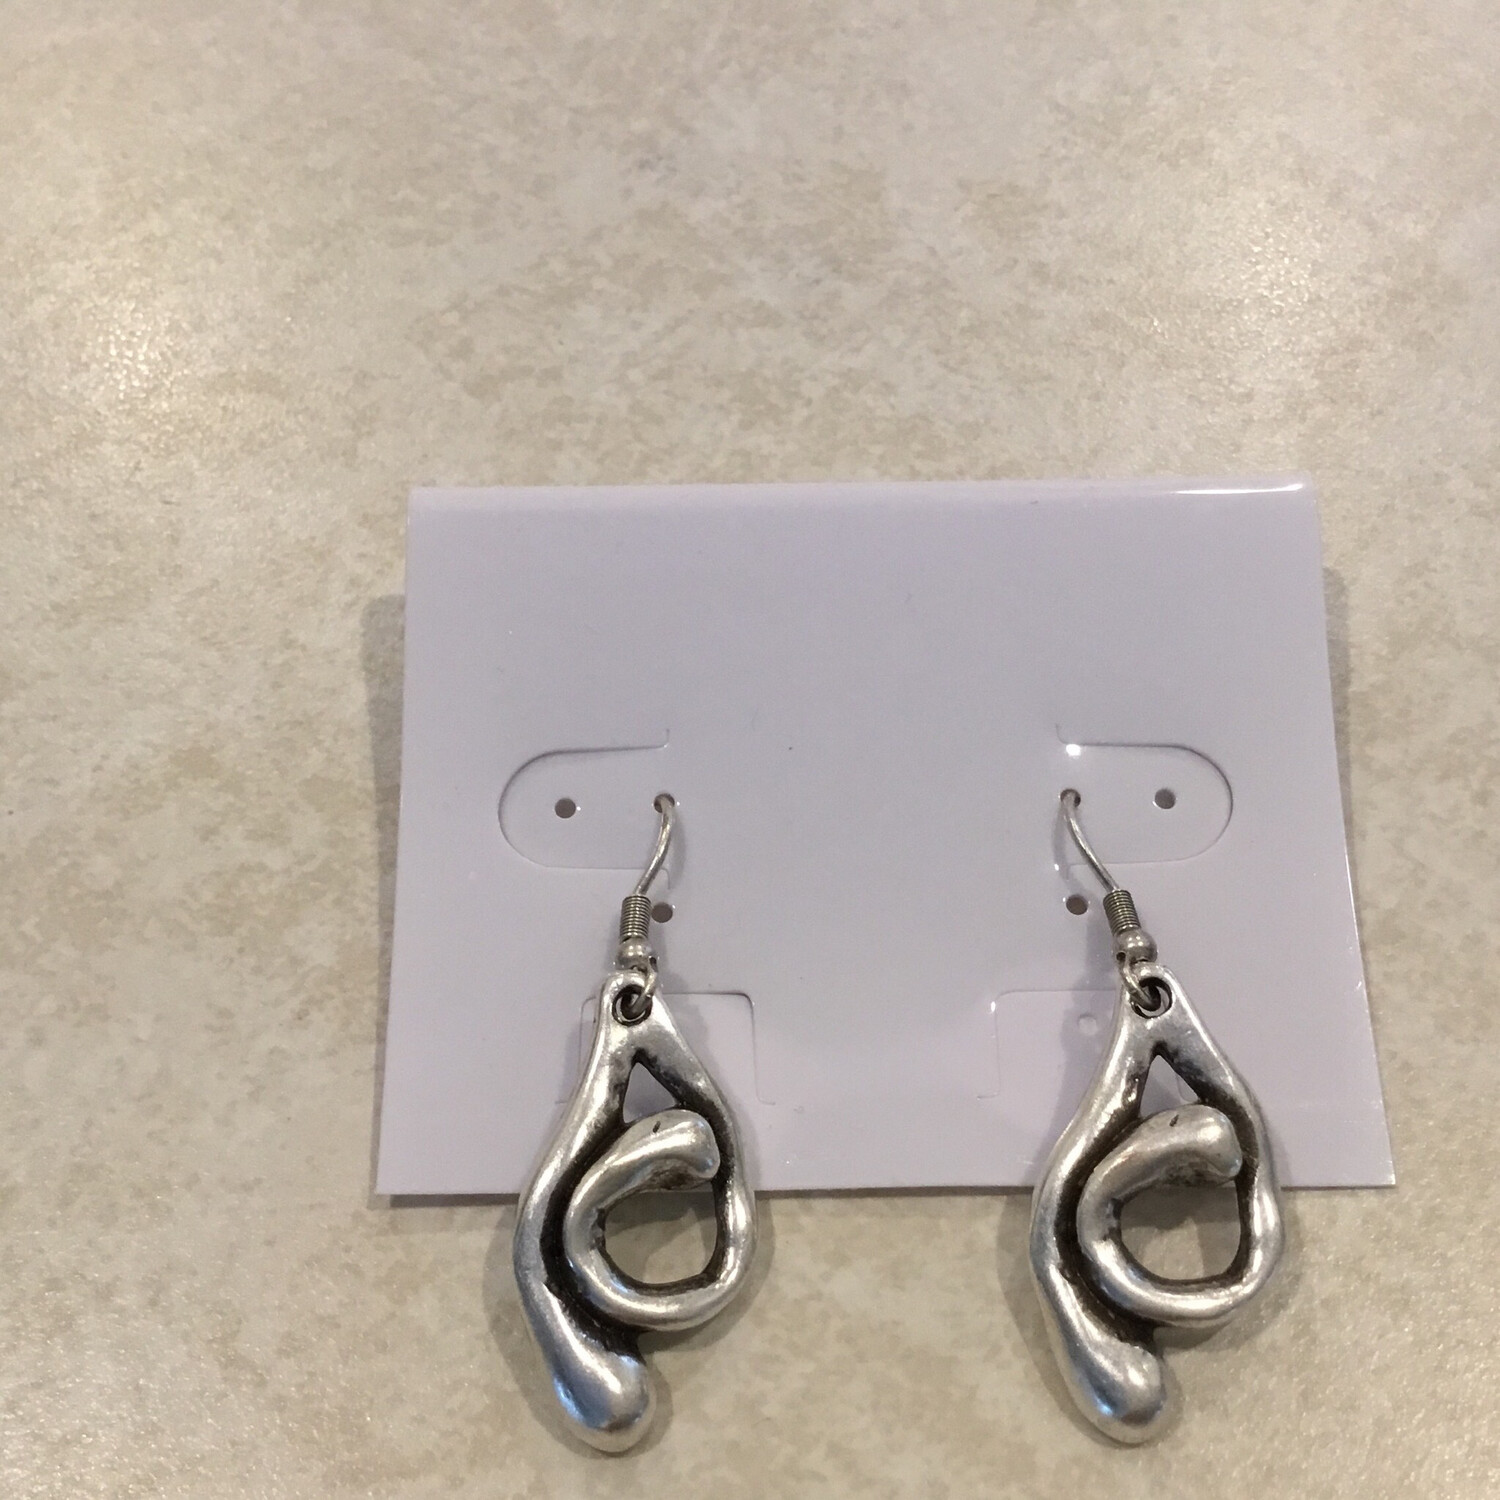 Handmade Pewter Earrings With Circle Design